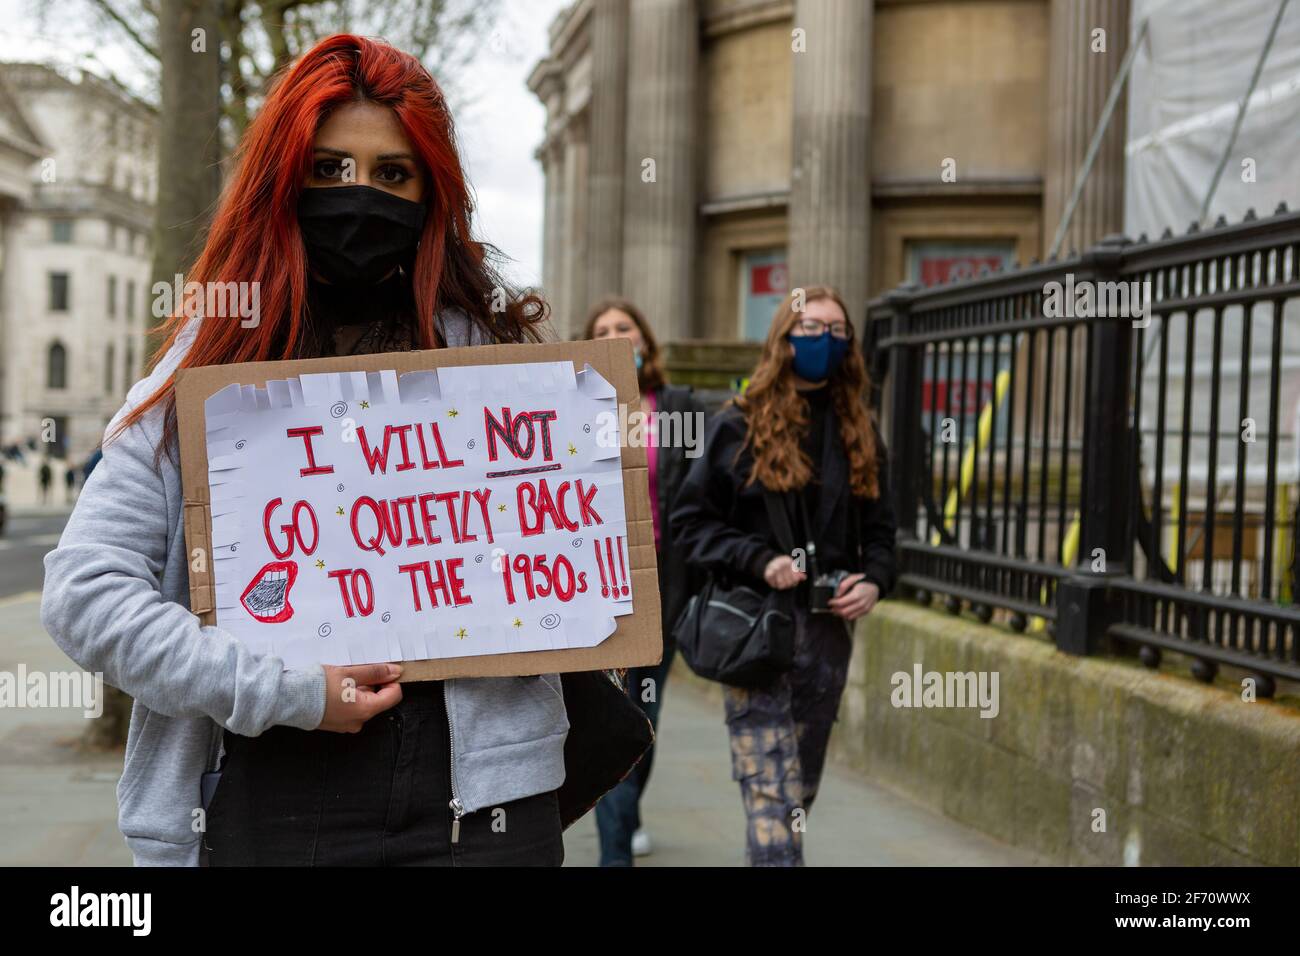 London, UK. 03rd Apr, 2021. A protester marching with a placard expressing her opinion, during the demonstration.A Month after kidnap and murder of 33-year-old Sarah Everard, women's rights protesters marched in central London chanting slogans and protested what they said had been a lack of action by government and police services. Sarah Everard disappeared on March 3rd and her body was found on March 12th. (Photo by Pietro Recchia/SOPA Images/Sipa USA) Credit: Sipa USA/Alamy Live News Stock Photo